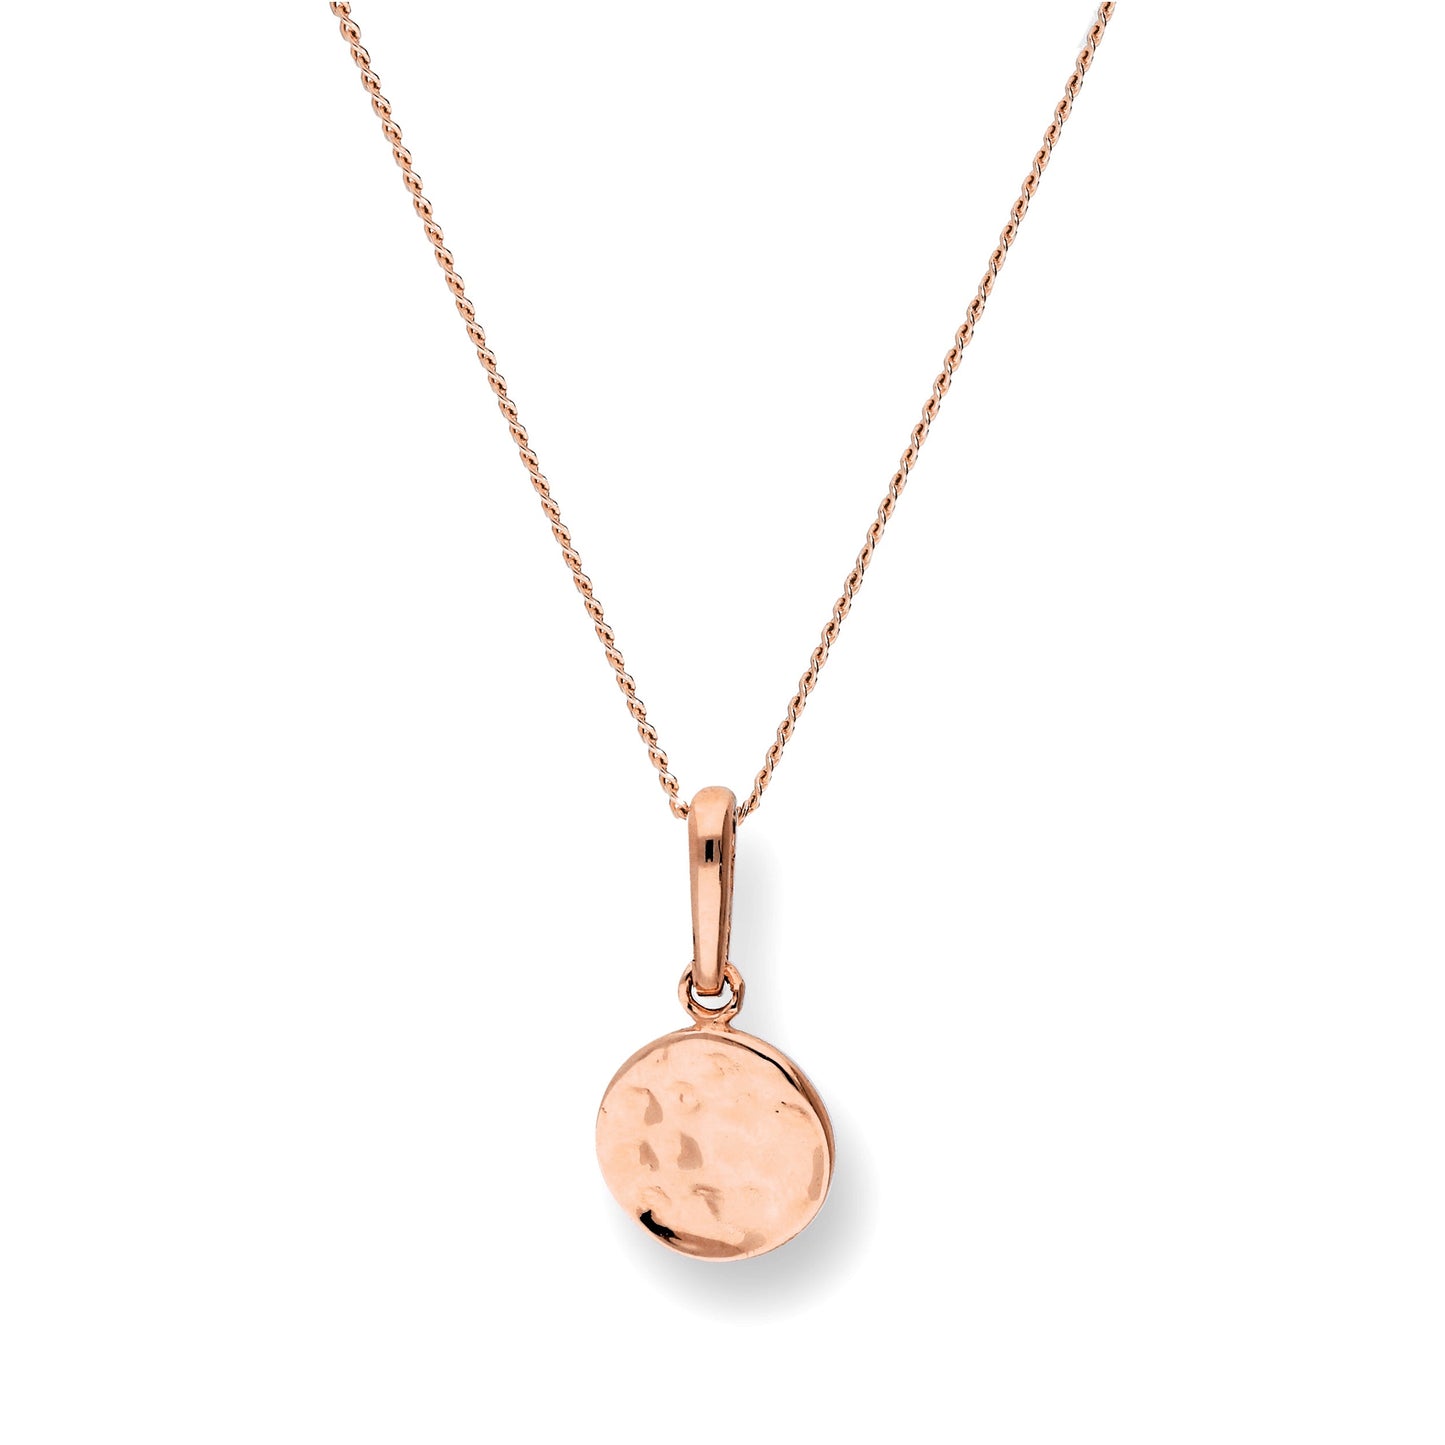 9ct Rose Gold Hammered Finish Round Necklace 16 - 20 Inches